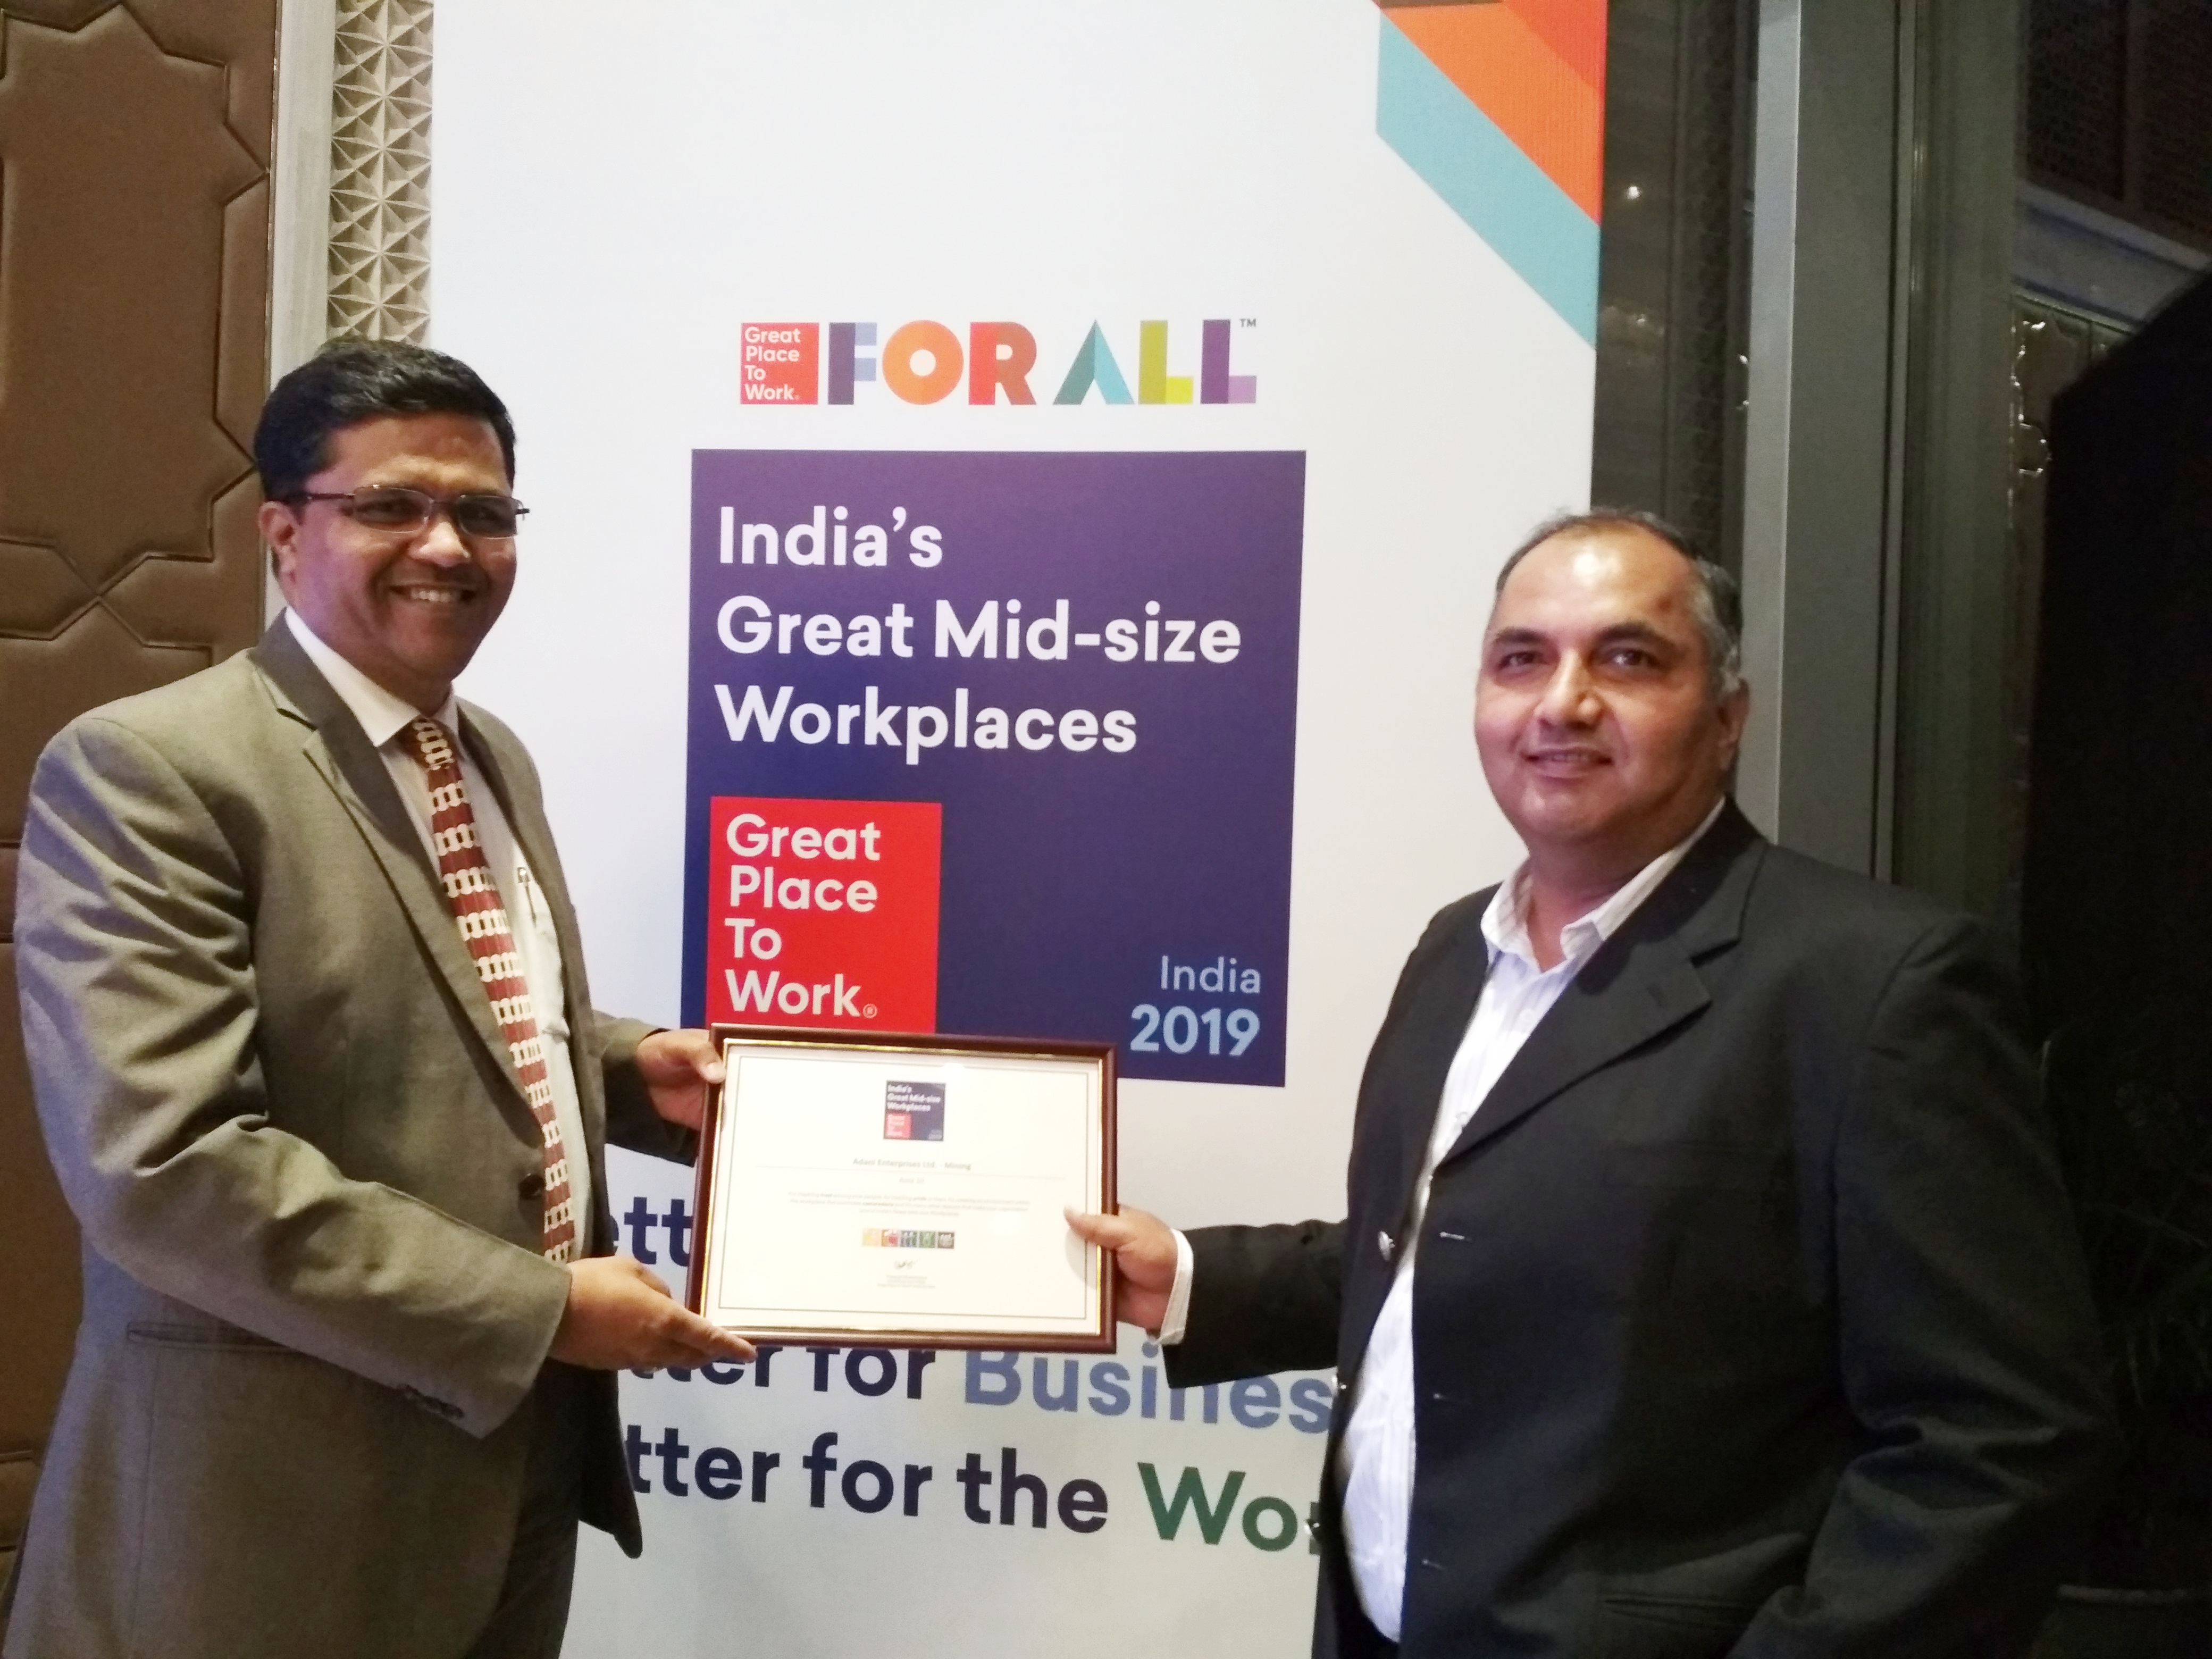 Adani Enterprises-Mining once again recognized amongst Top 50 Great Mid-size Workplaces in India by Great Place to Work® Institute